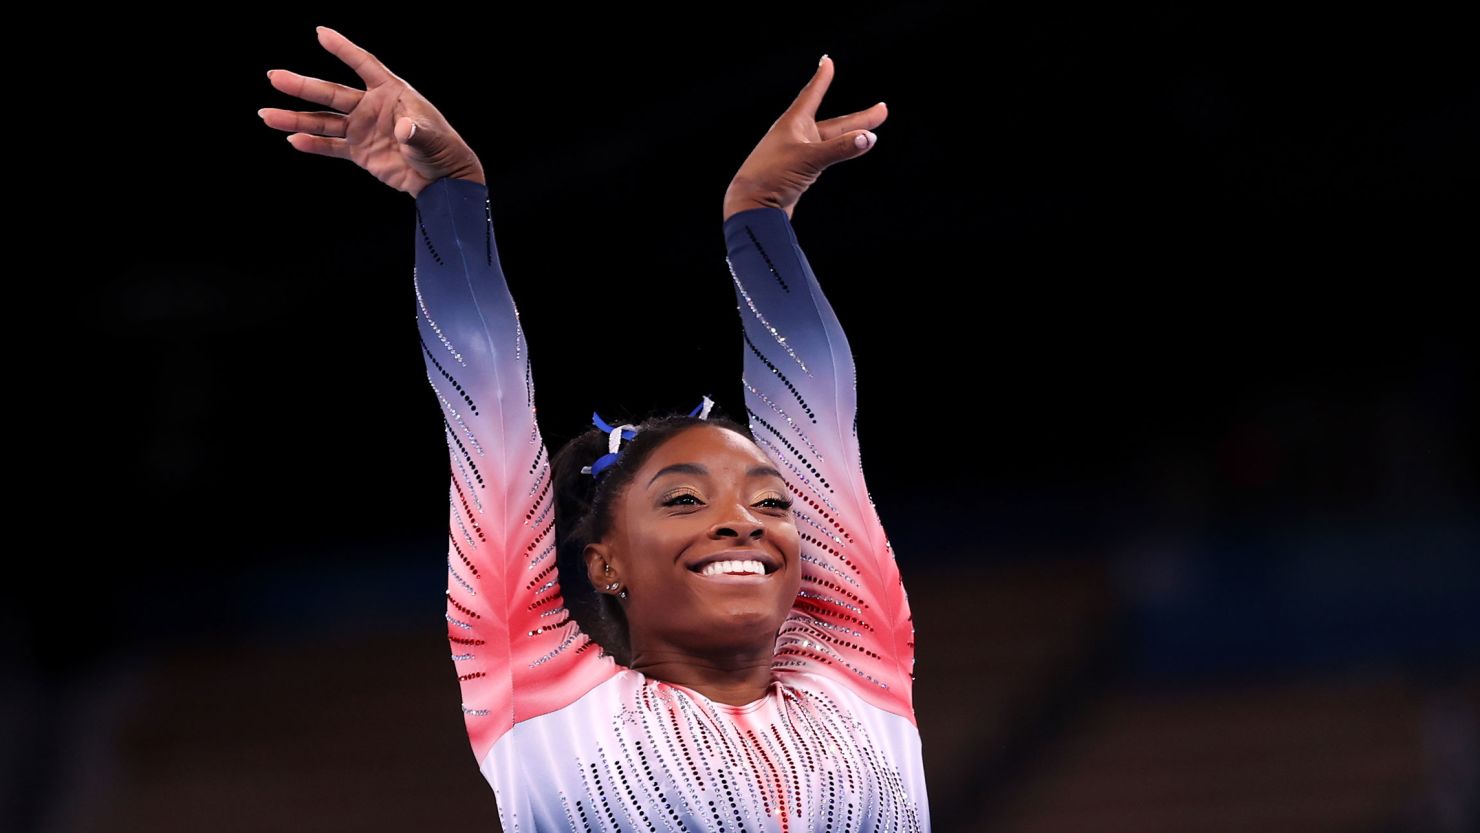 Simone Biles stepped away from 'corrosive' gymnastics for mental health.  Now she's back